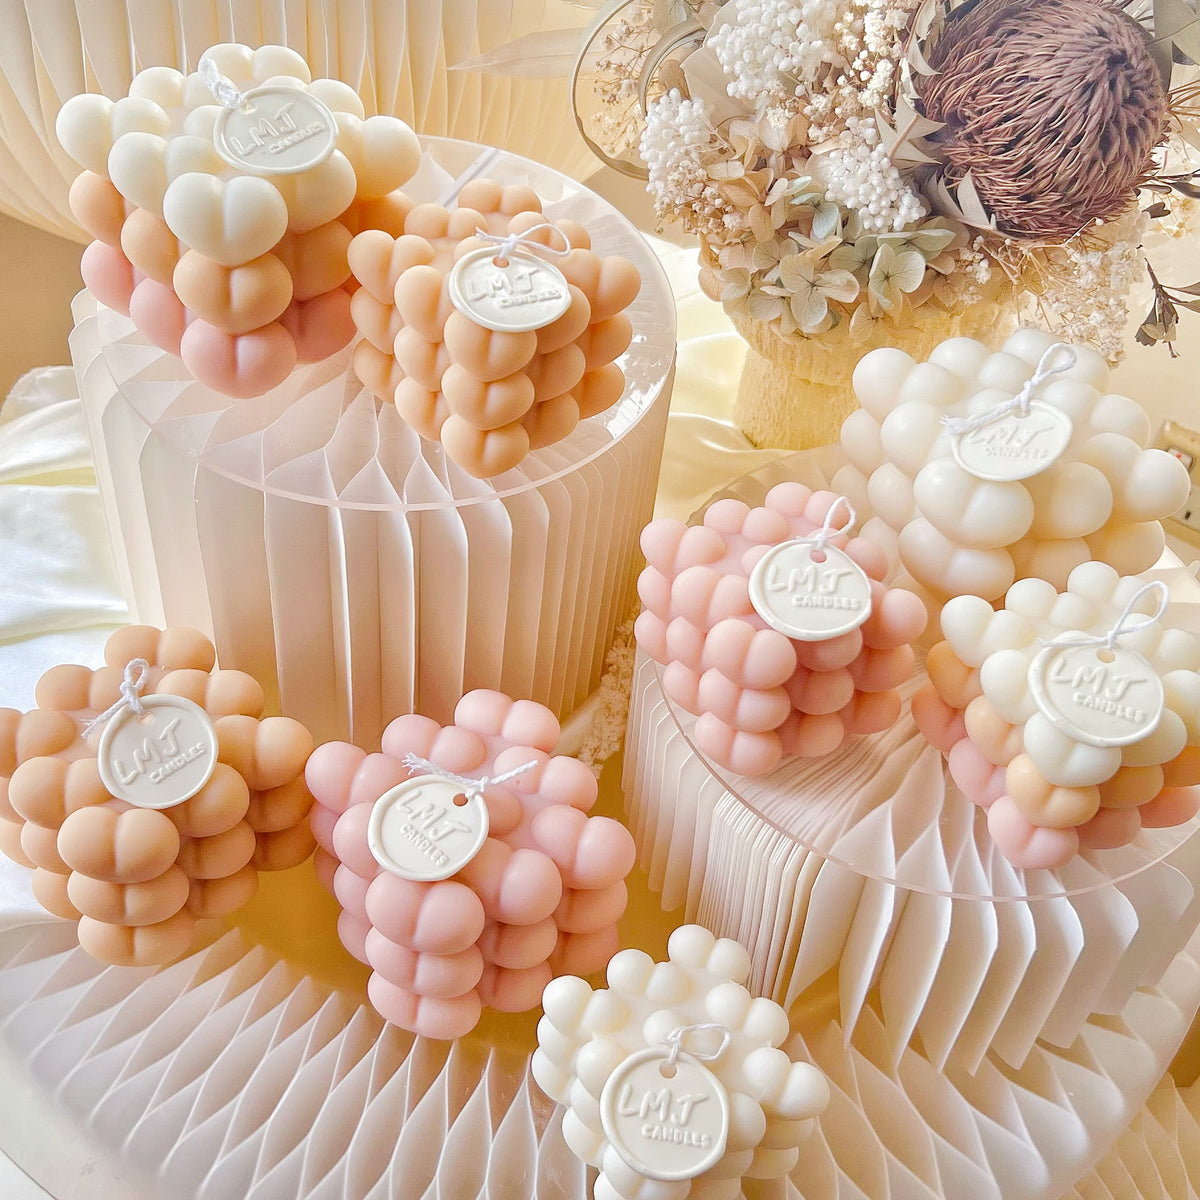 Handmade scented bubble cube candles, including heart and bubble ball candles, for stylish home décor and photo props | LMJ Candles